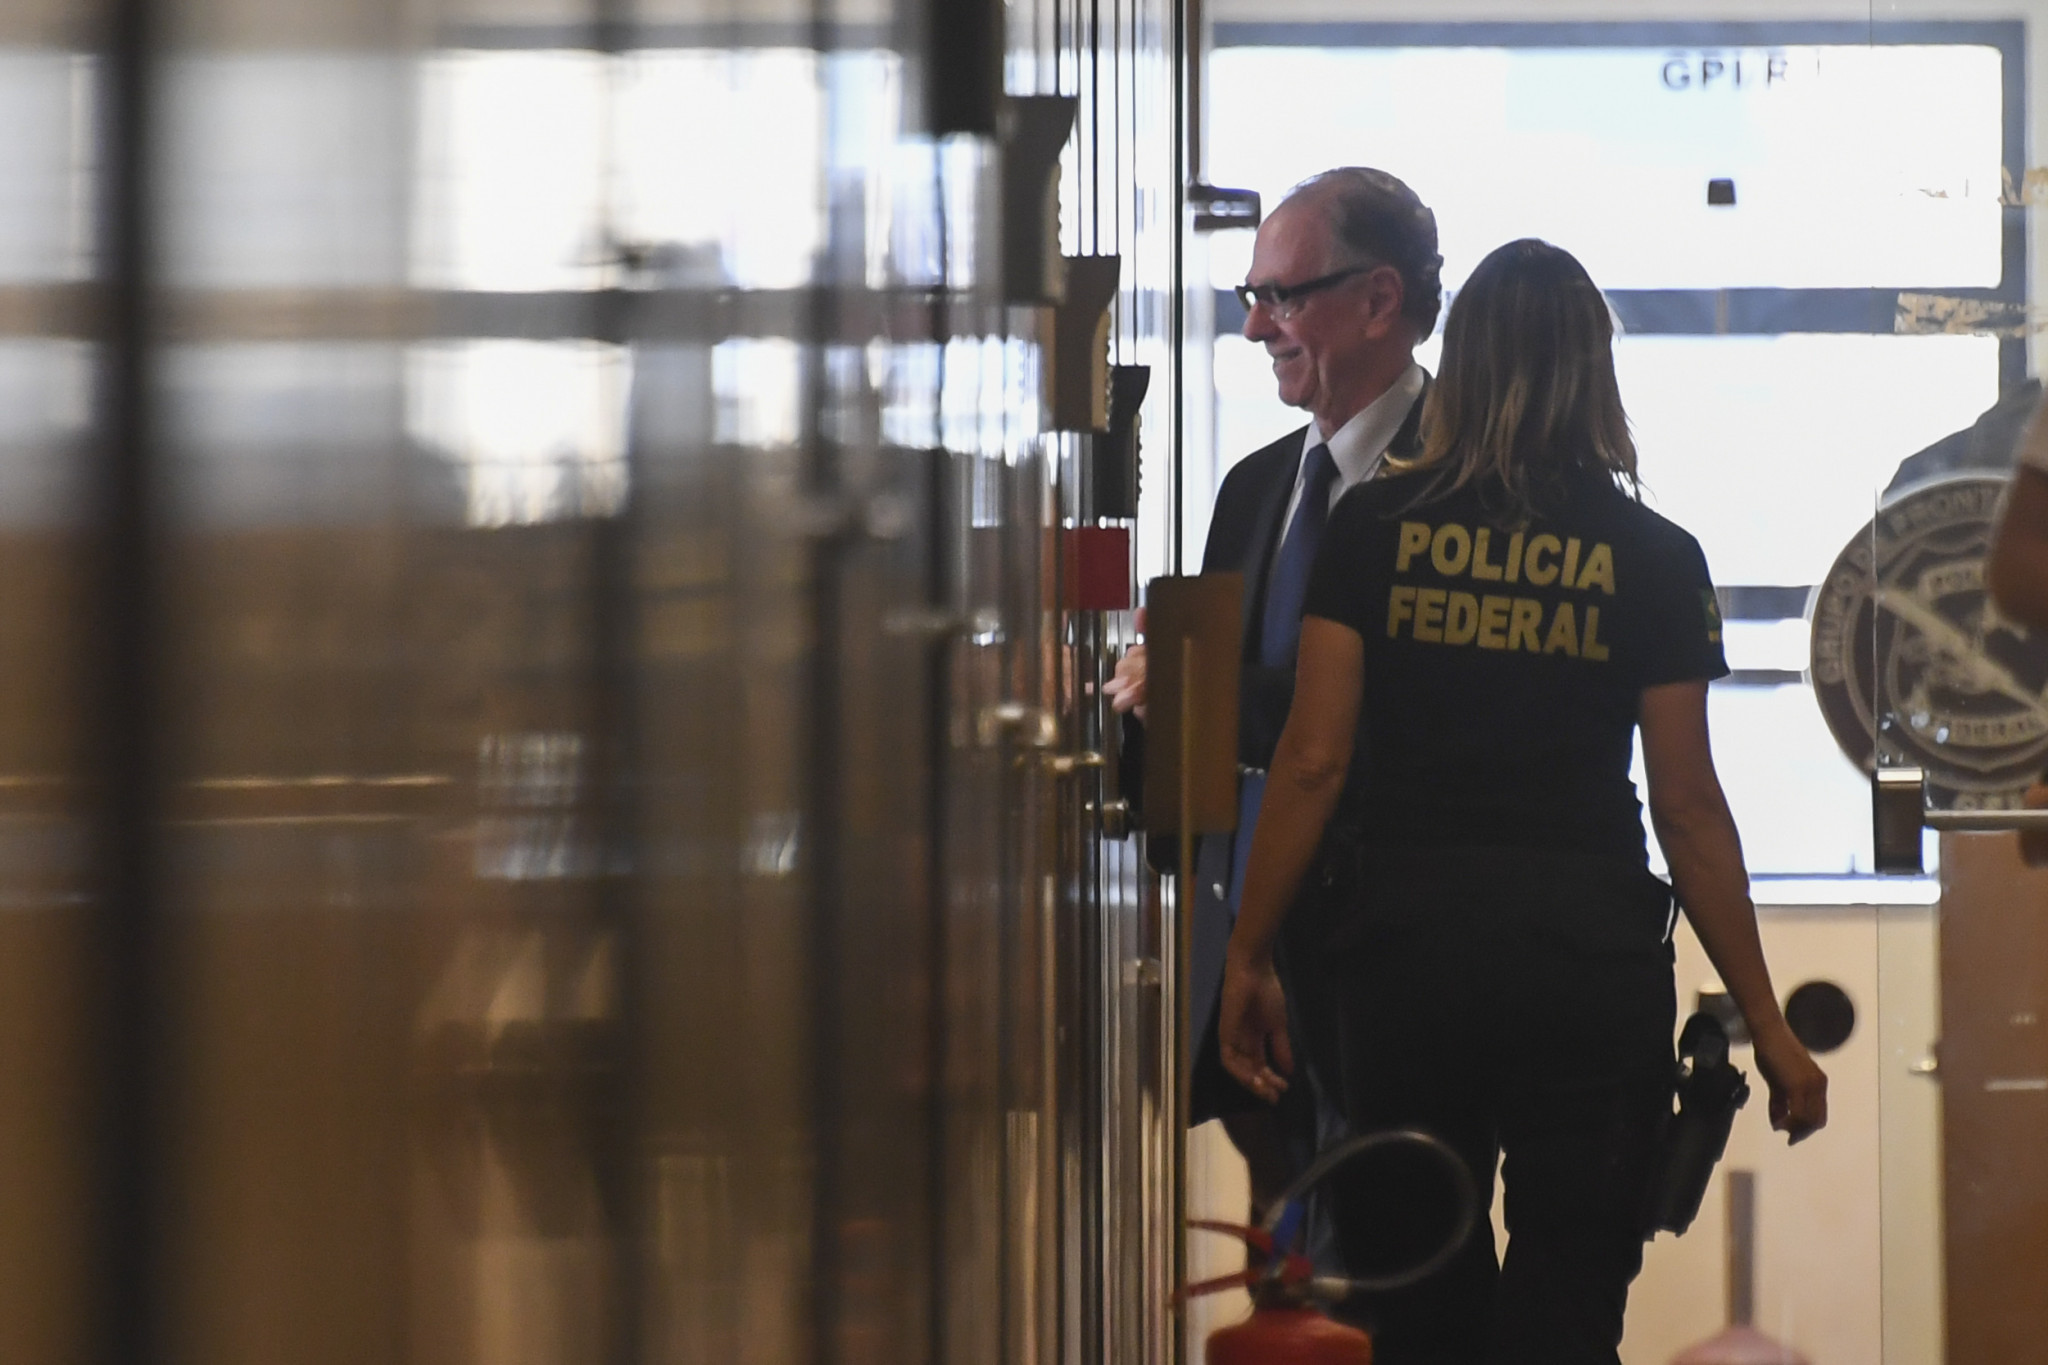 Rio 2016 President Carlos Nuzman entering the Federal Police Building in Rio de Janeiro last week after his house was searched following claims he had been involved in a scheme to help bribe IOC members from Africa ©Getty Images